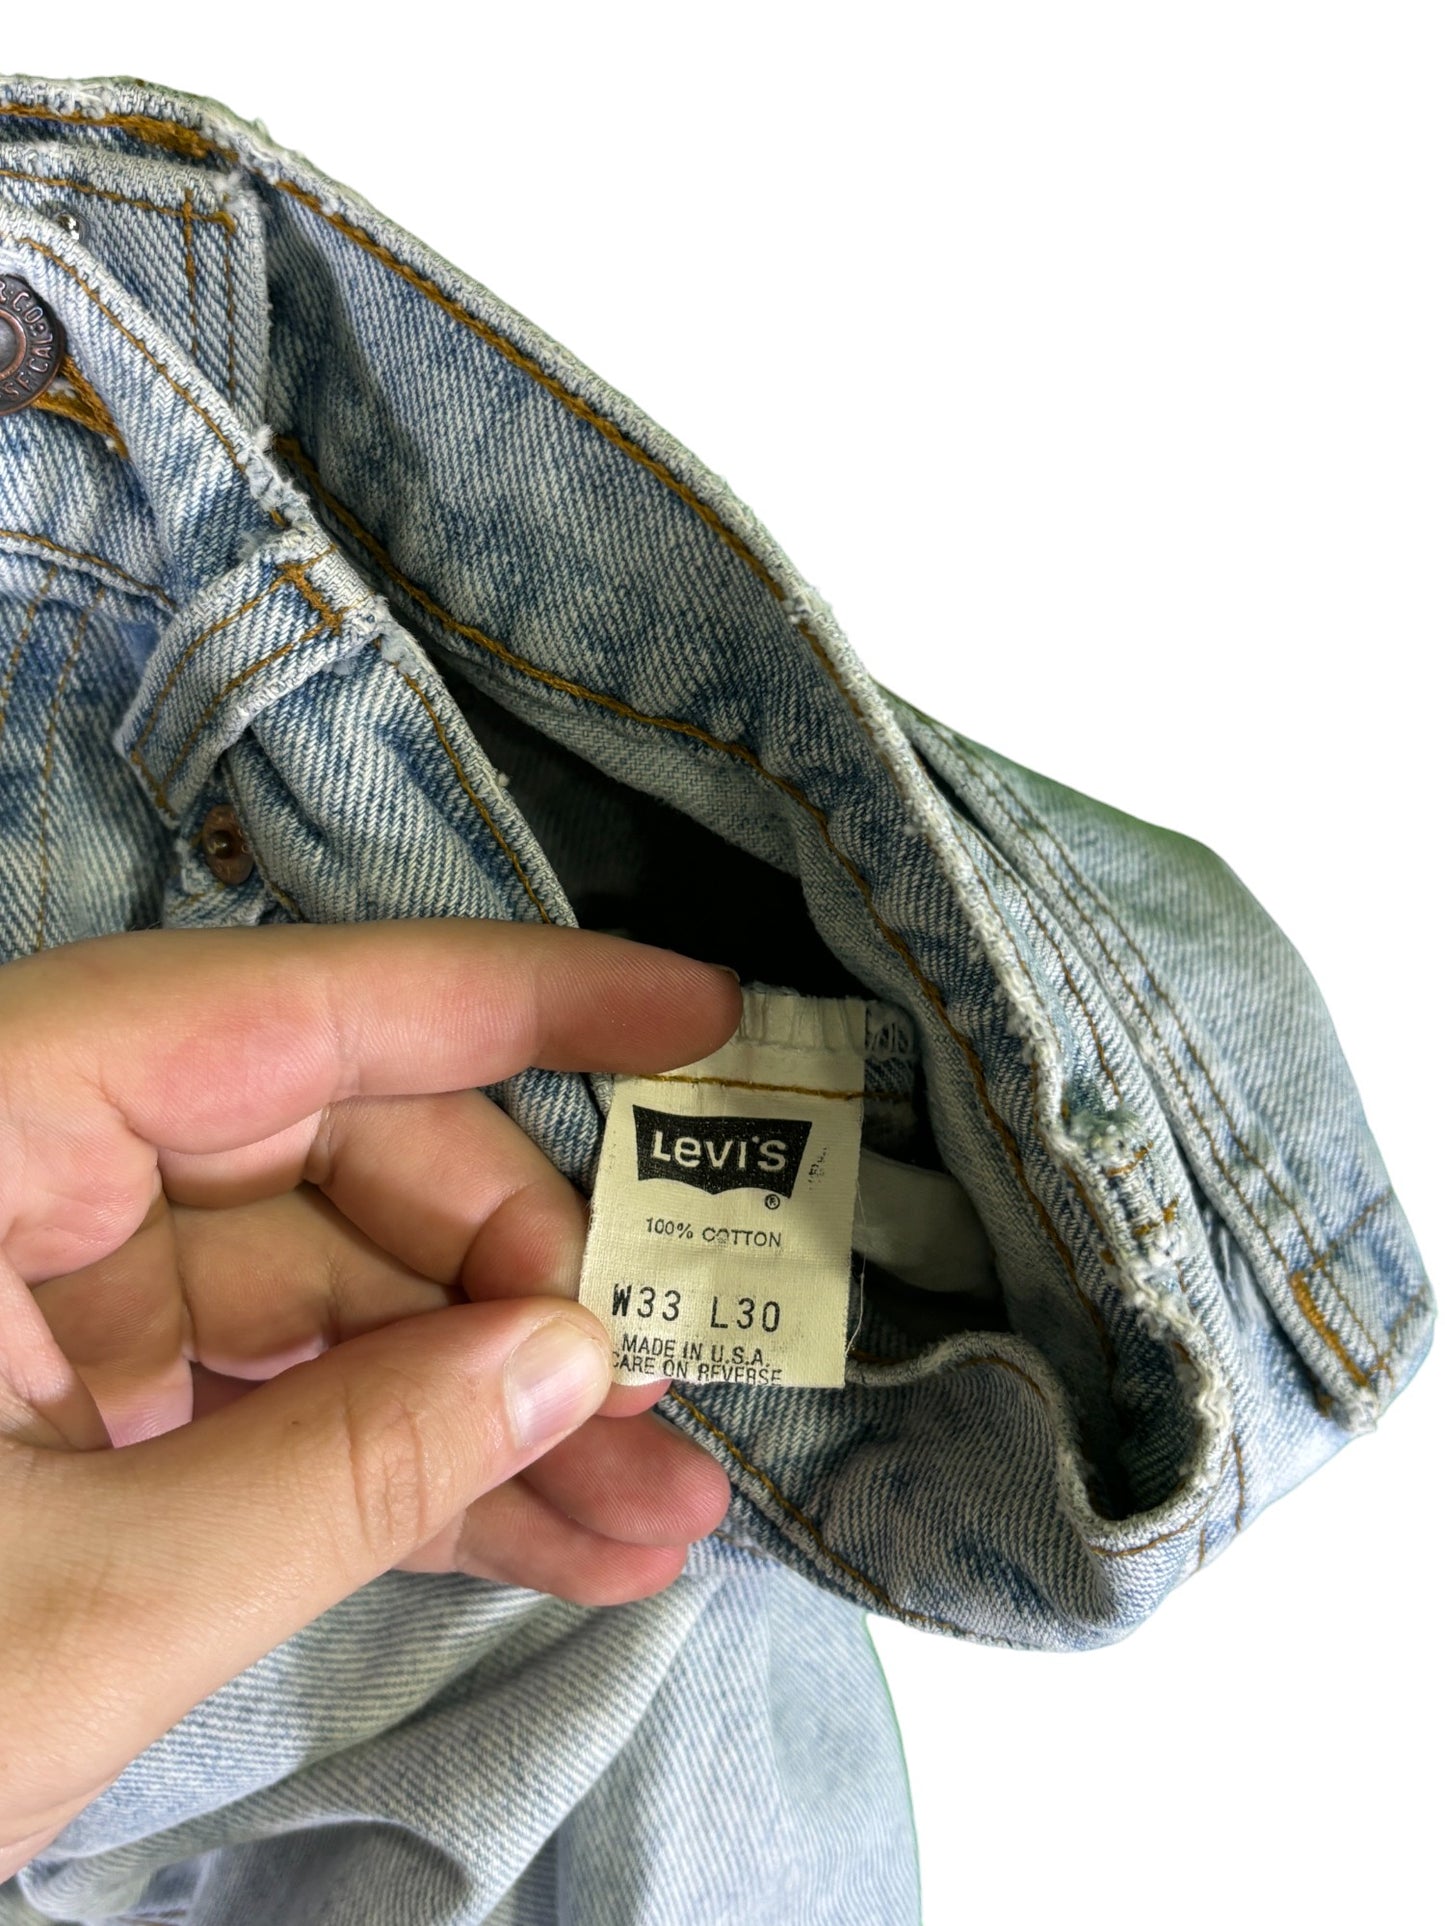 Vintage 90's Levi's 505 Light Wash Made in USA Denim Jeans Size 32x29